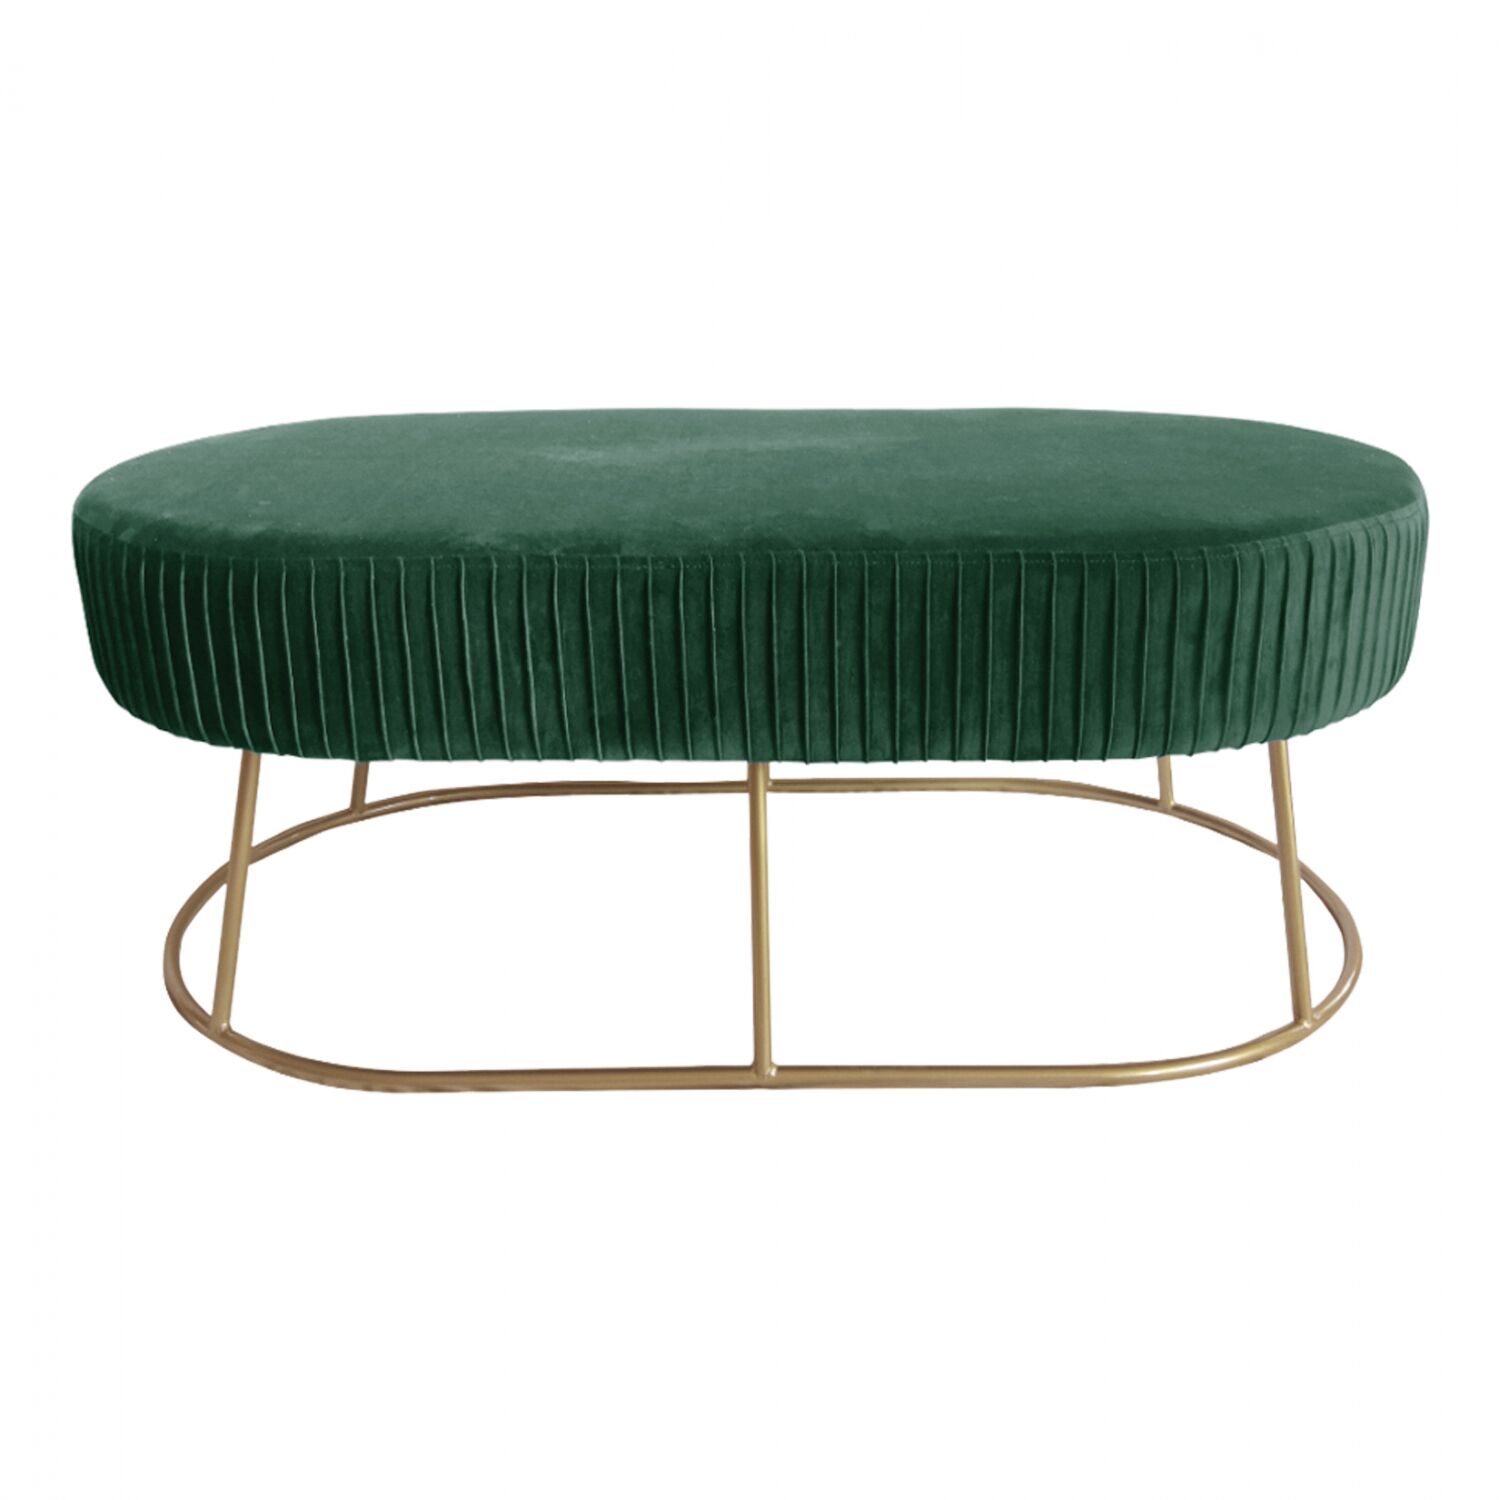 Bench Alinafe HM8635.03 from cyppress green velvet with gold base 118x66x42cm